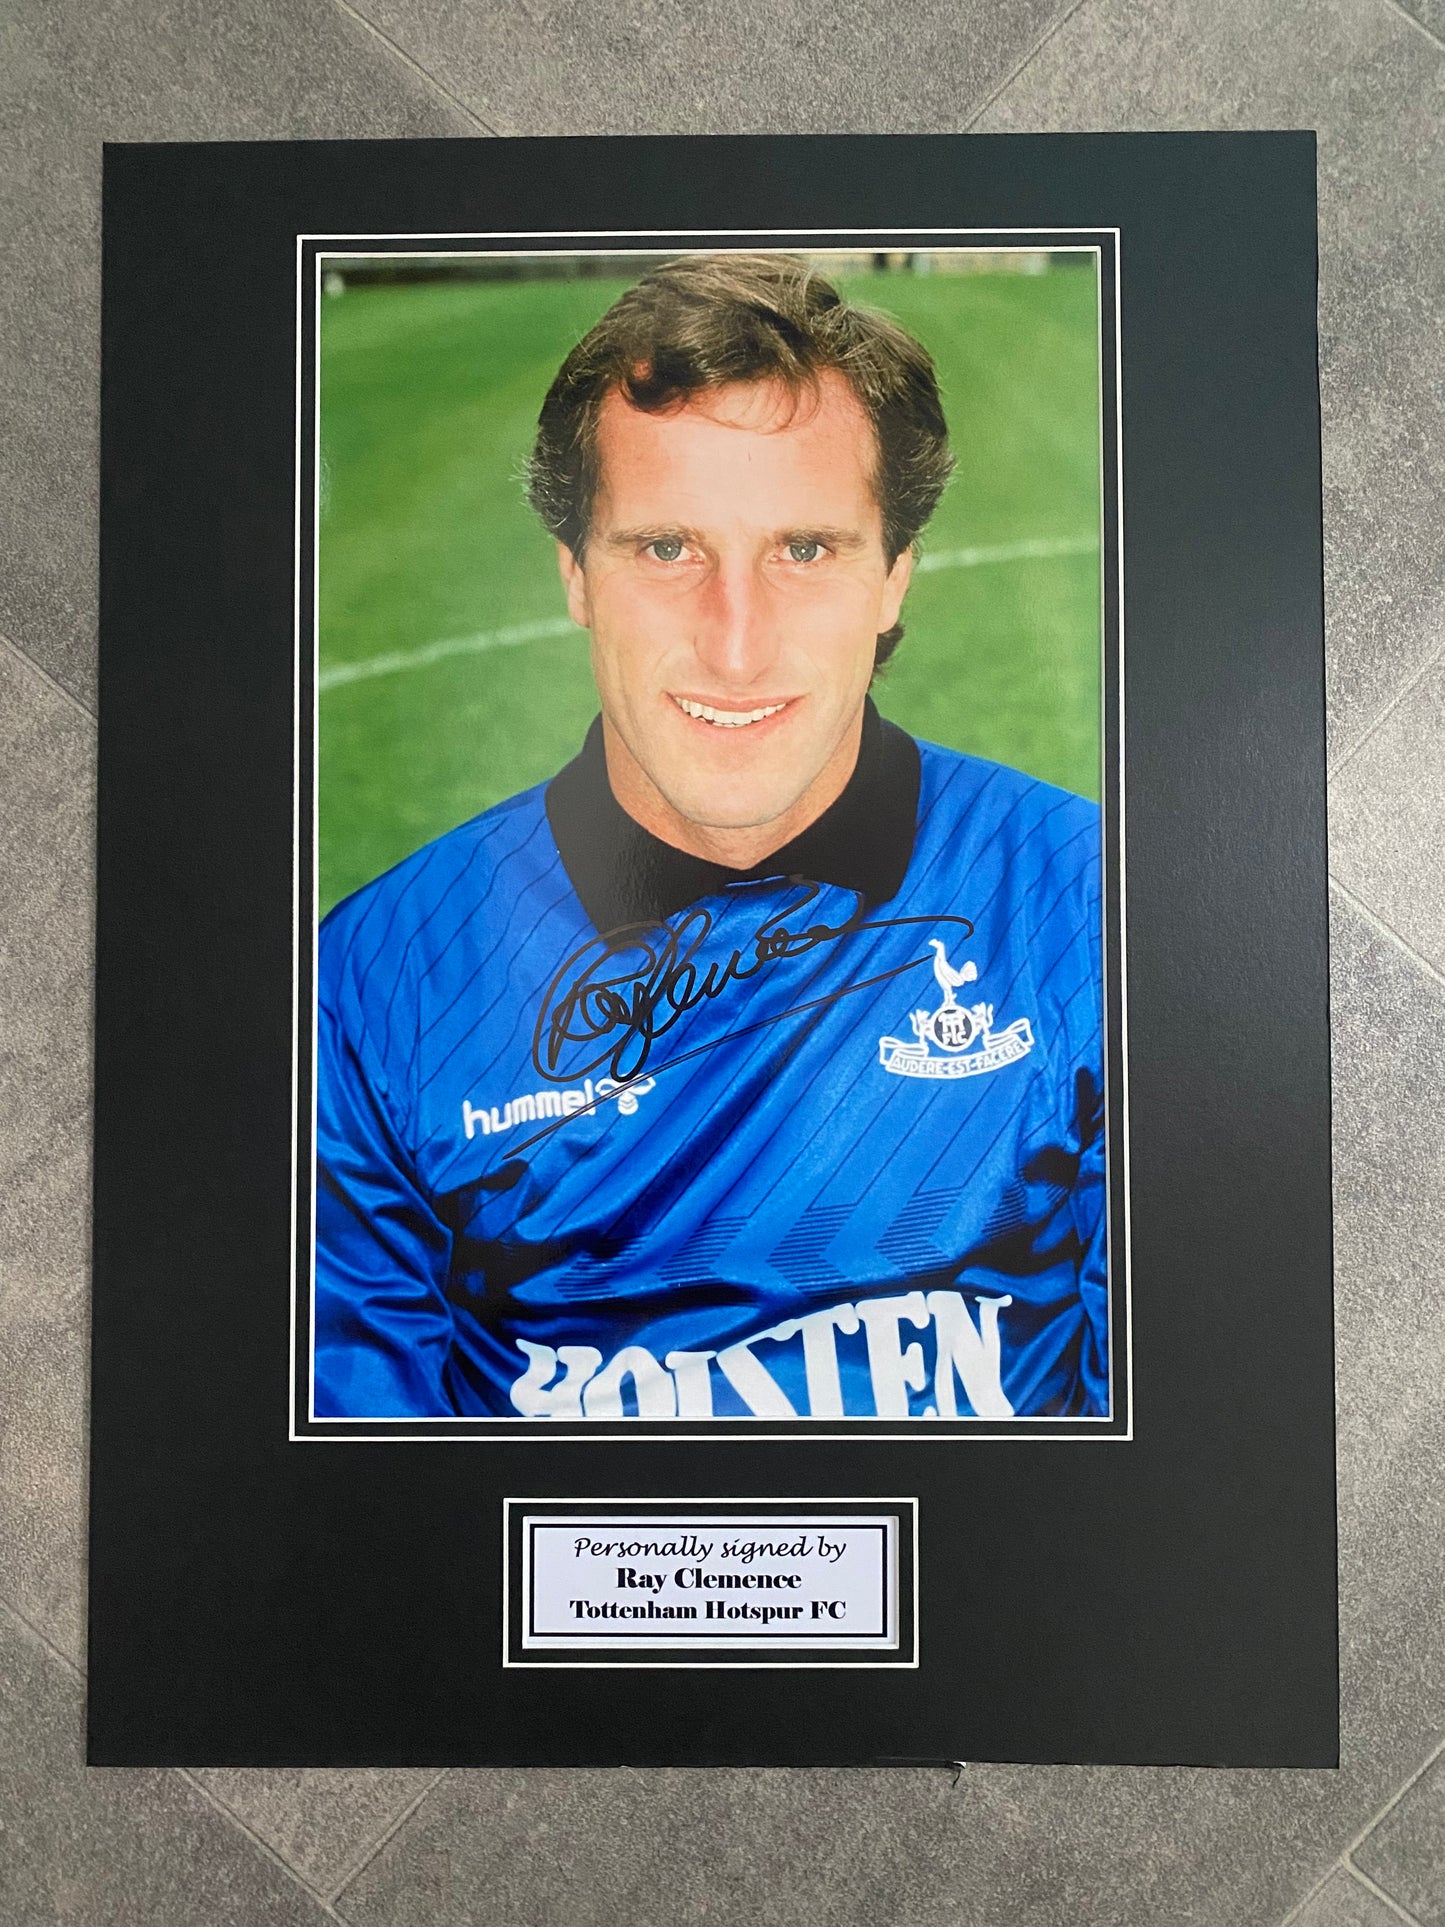 Ray Clemence - Tottenham Hotspur FC "Legend" - 16x12in signed photo mount- THFC memorabilia, gift, display (UNFRAMED)